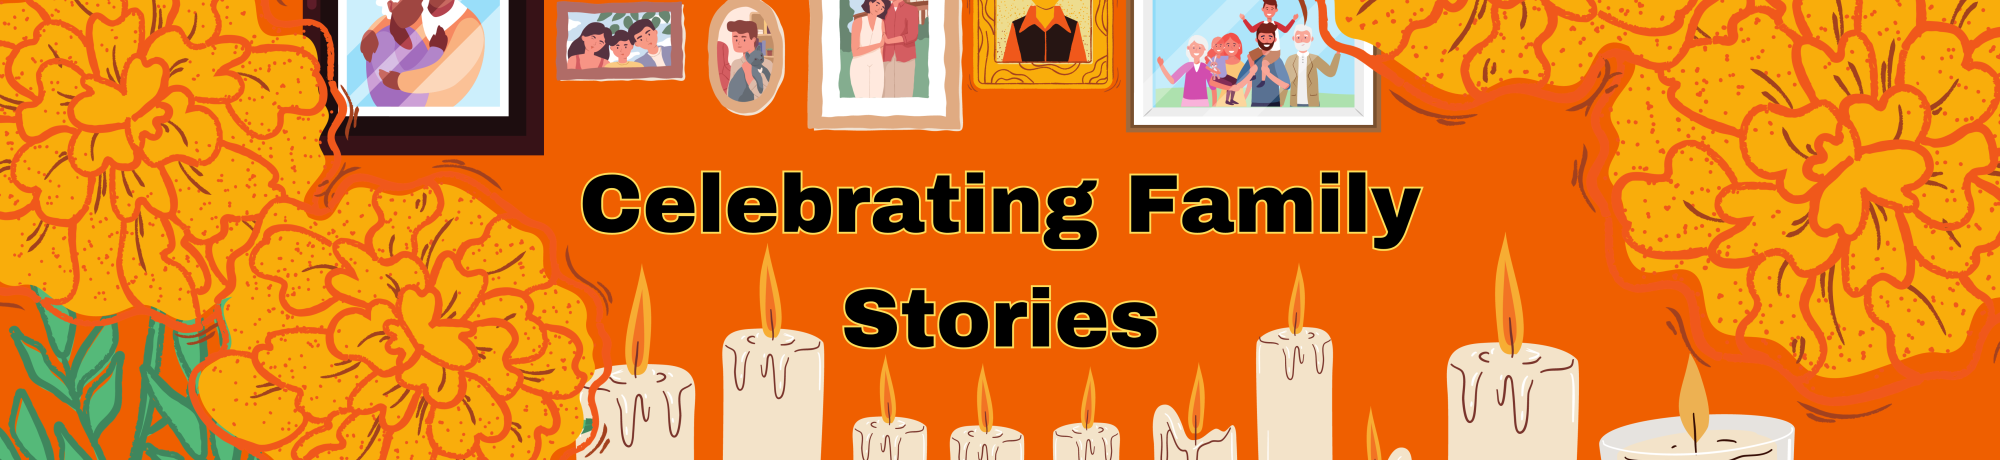 Celebrating Family Stories in bold text, surrounded by an orange background with framed family photographs, marigold flowers, and lit candles.